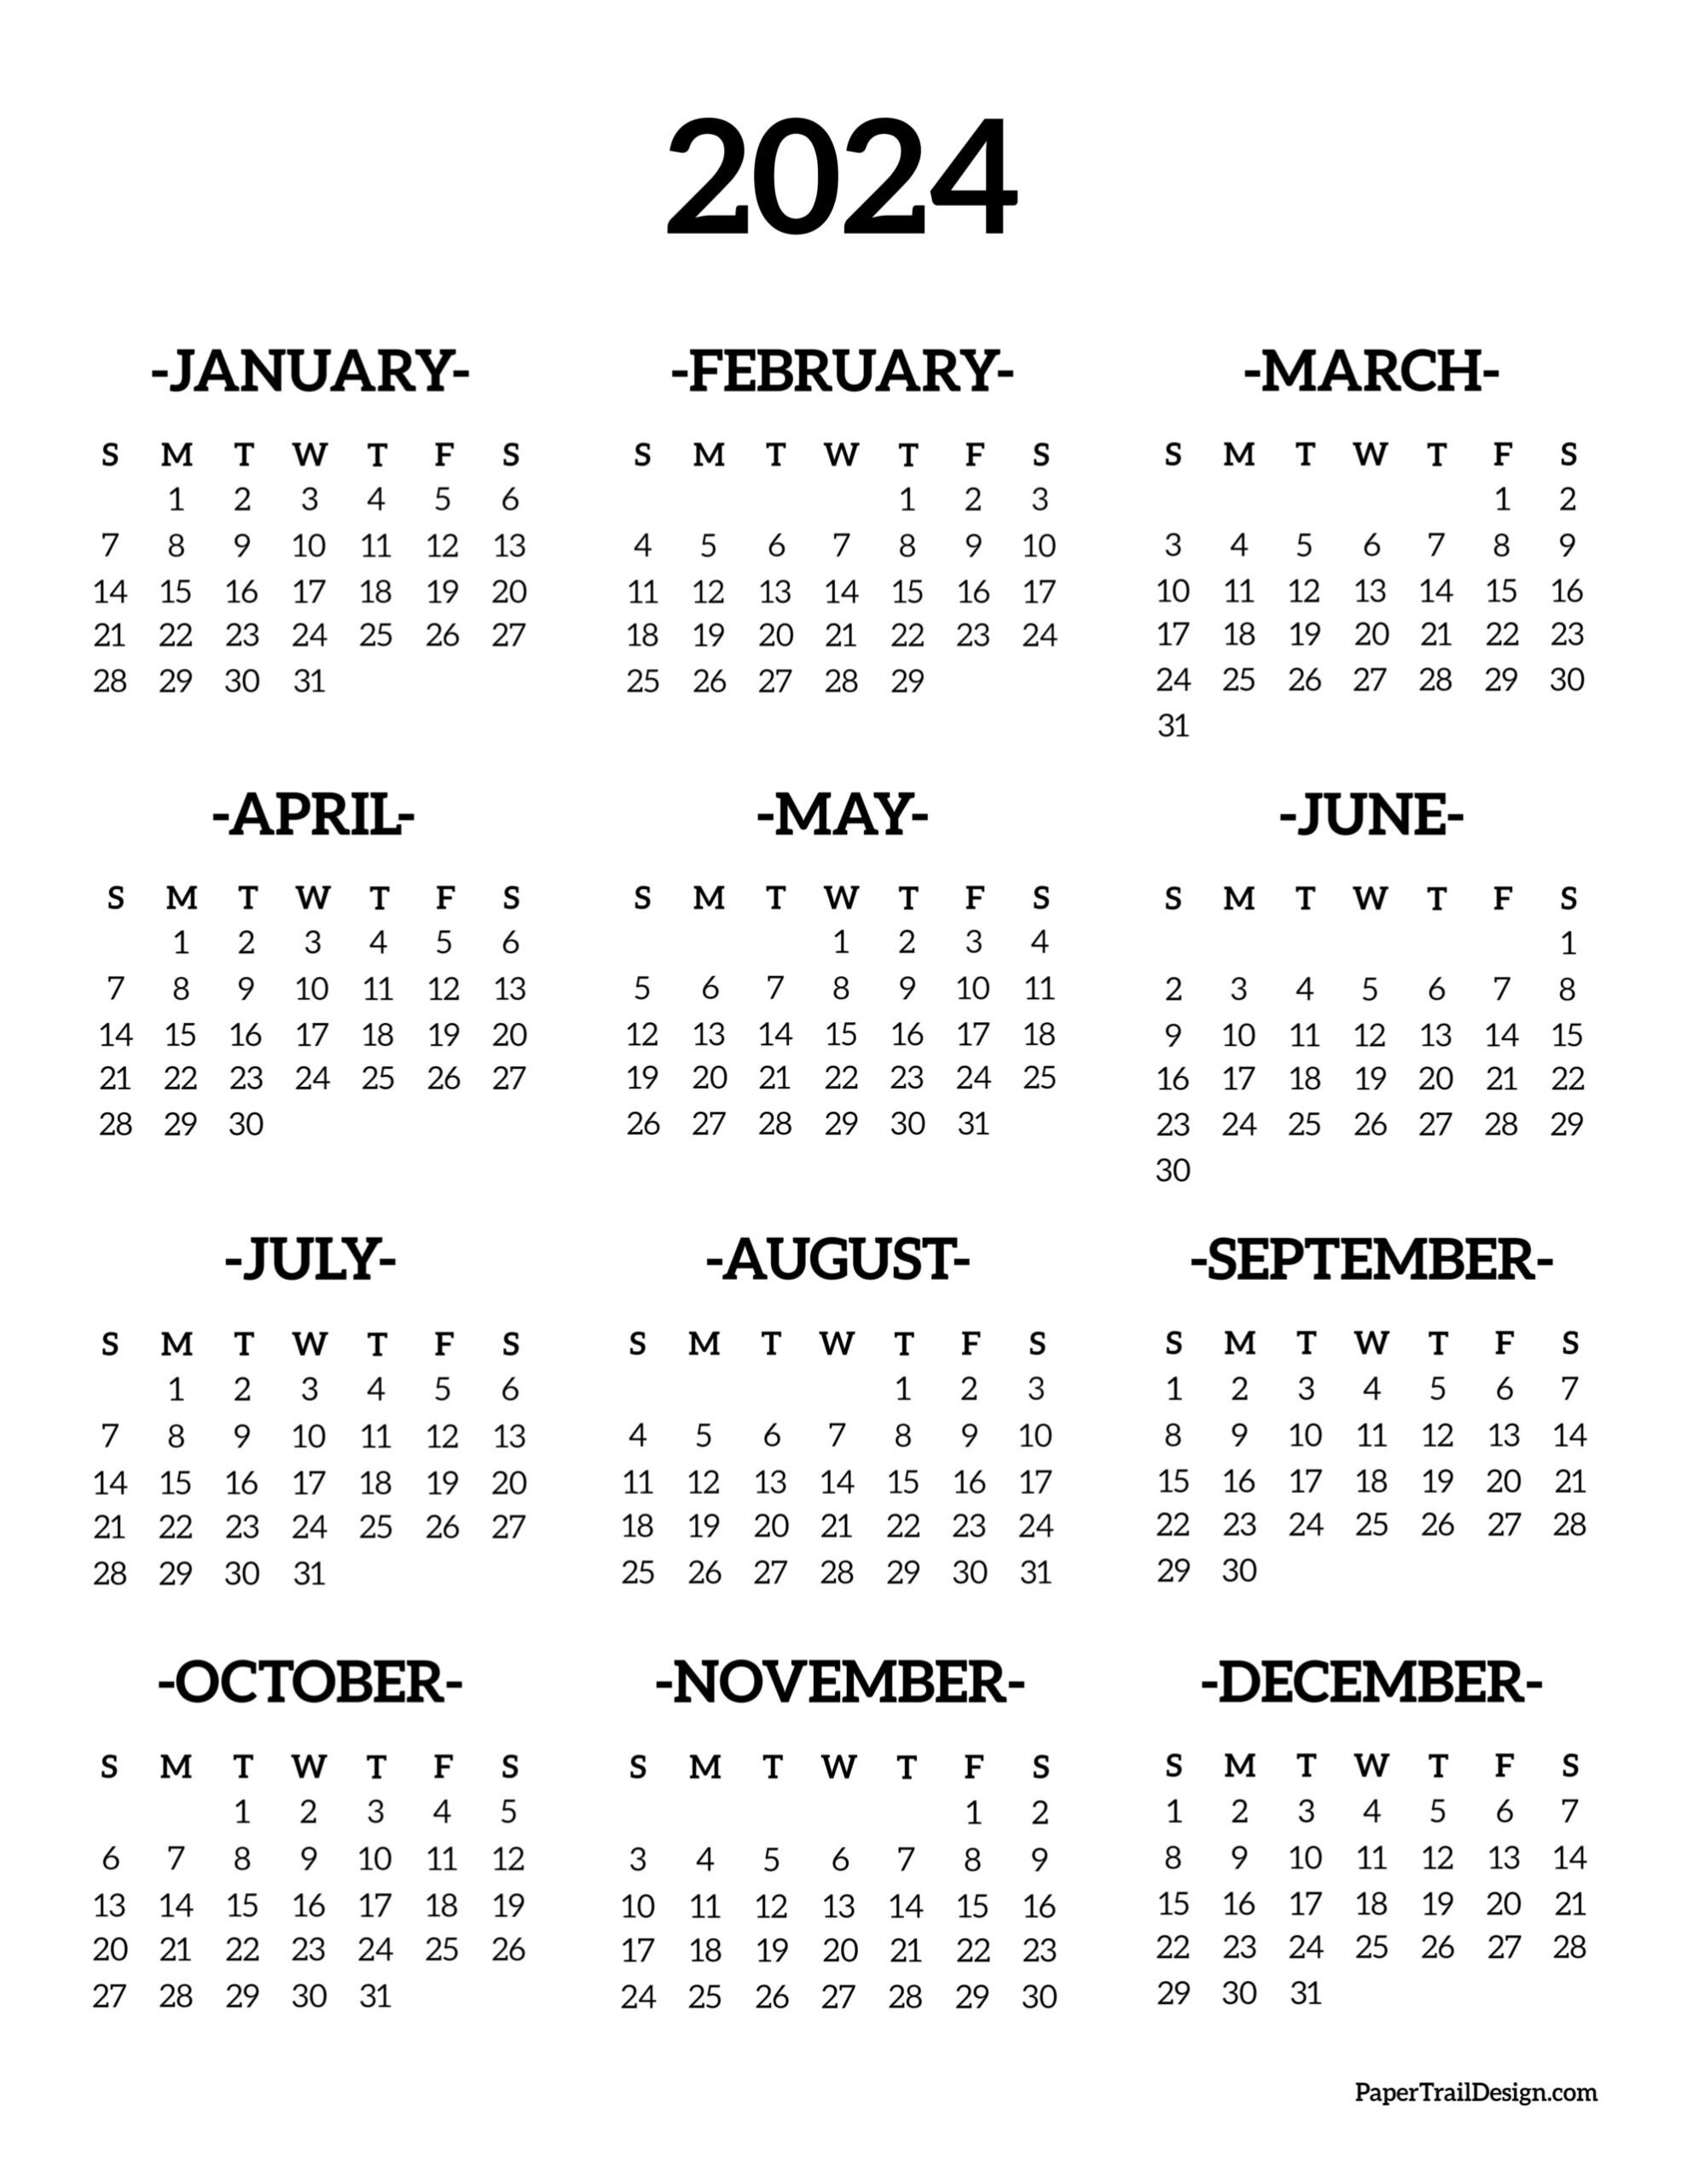 Calendar 2024 Printable One Page - Paper Trail Design inside Free Printable Calendar 2024 Paper Trail Design